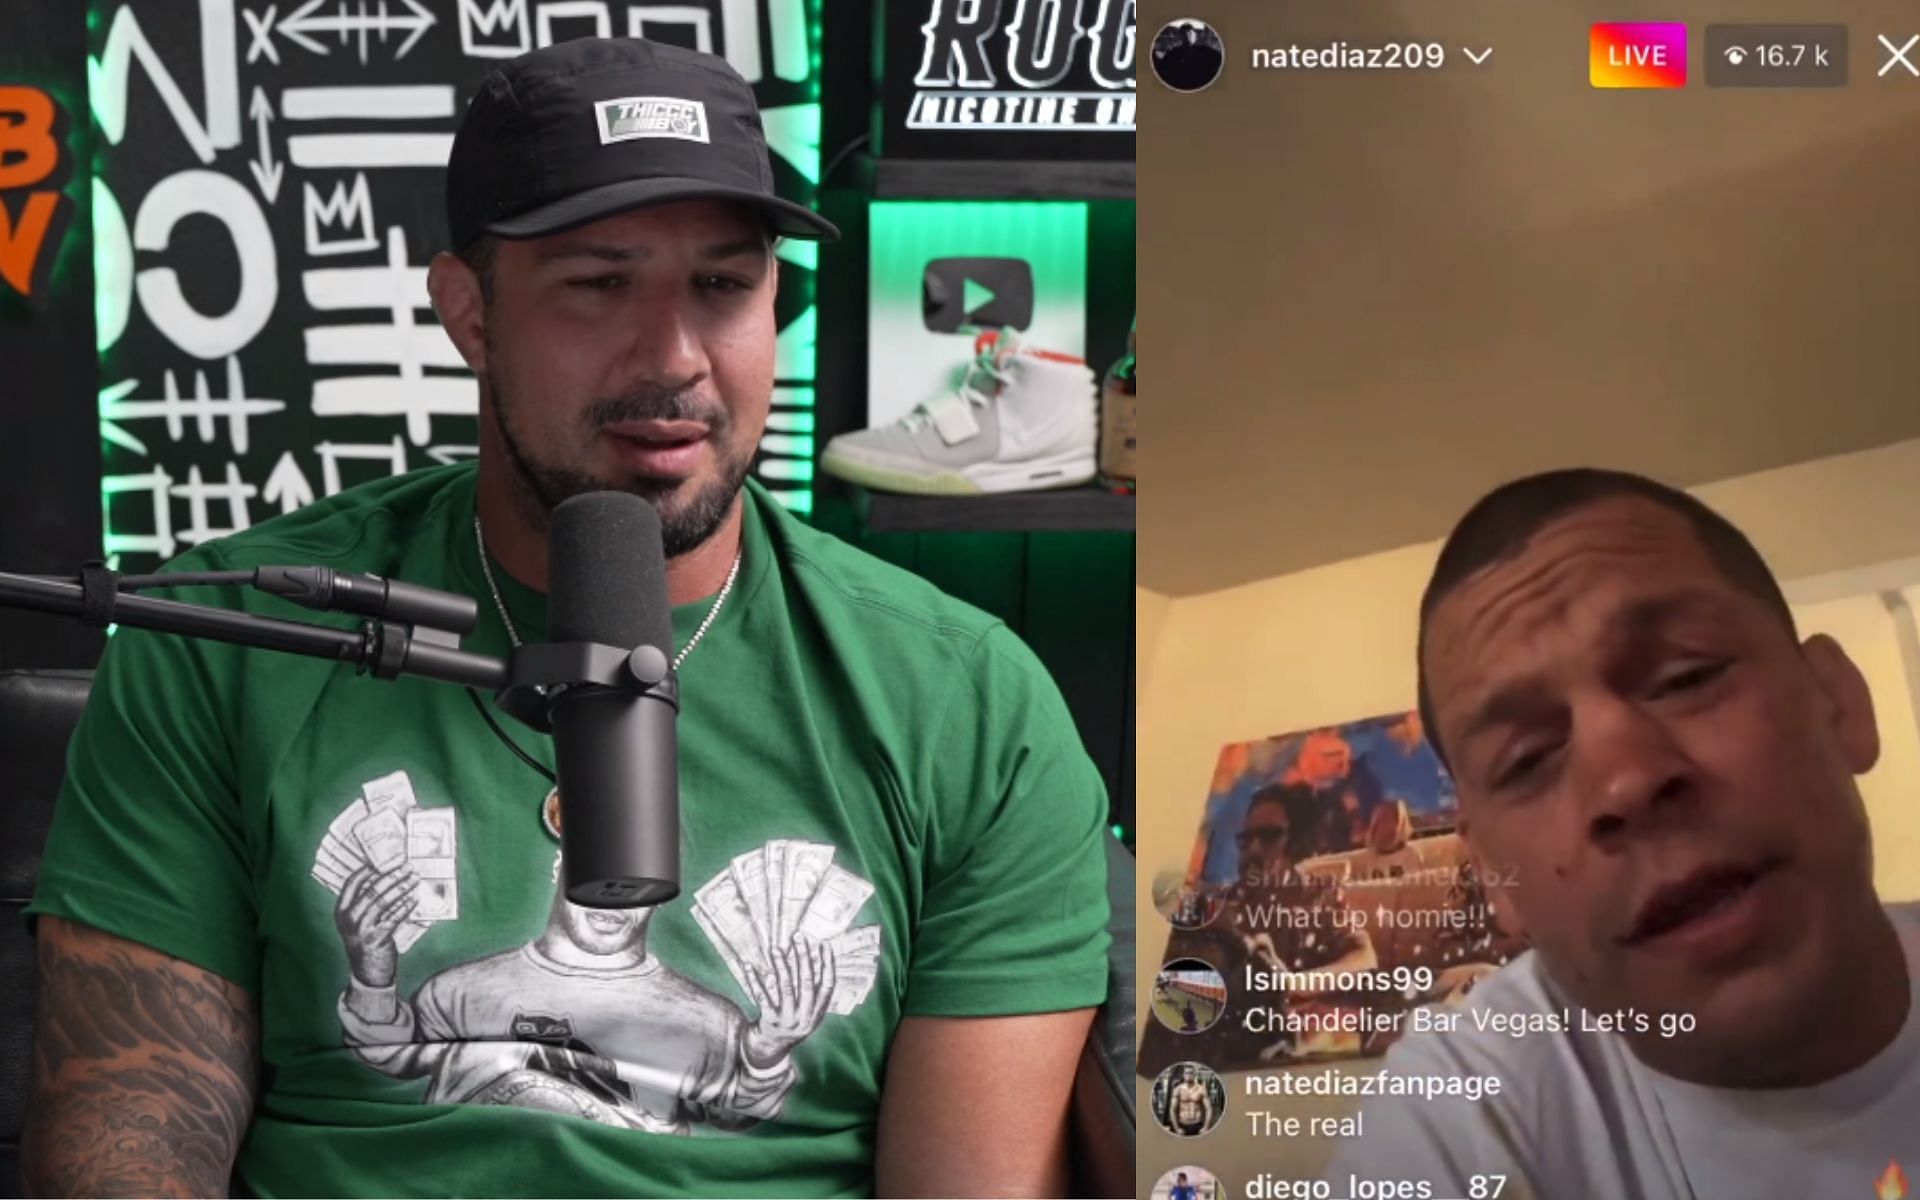 Brendan Schaub (left) and Nate Diaz (right). [Images courtesy: left image from YouTube Thiccc Boy and right image from Instagram @natediaz209]